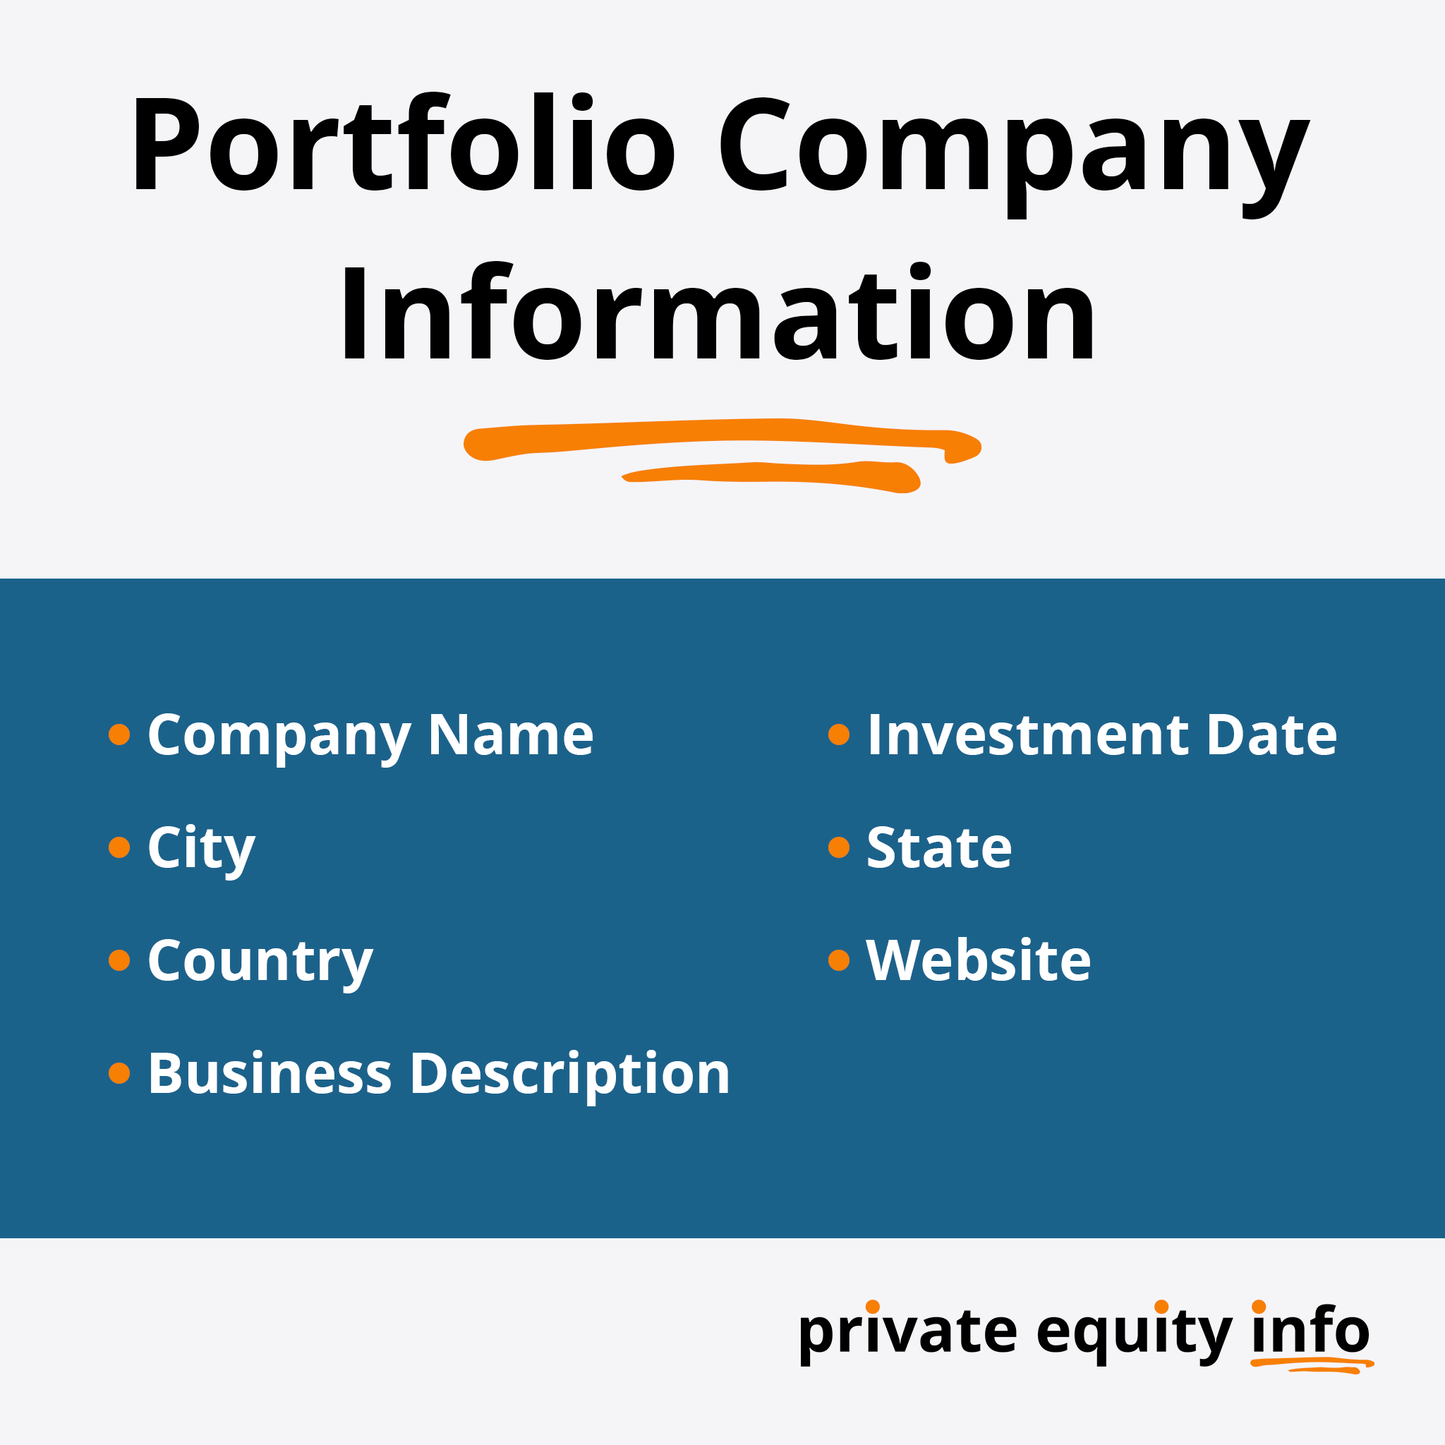 List of Private Equity Firms in the Digital Media Industry